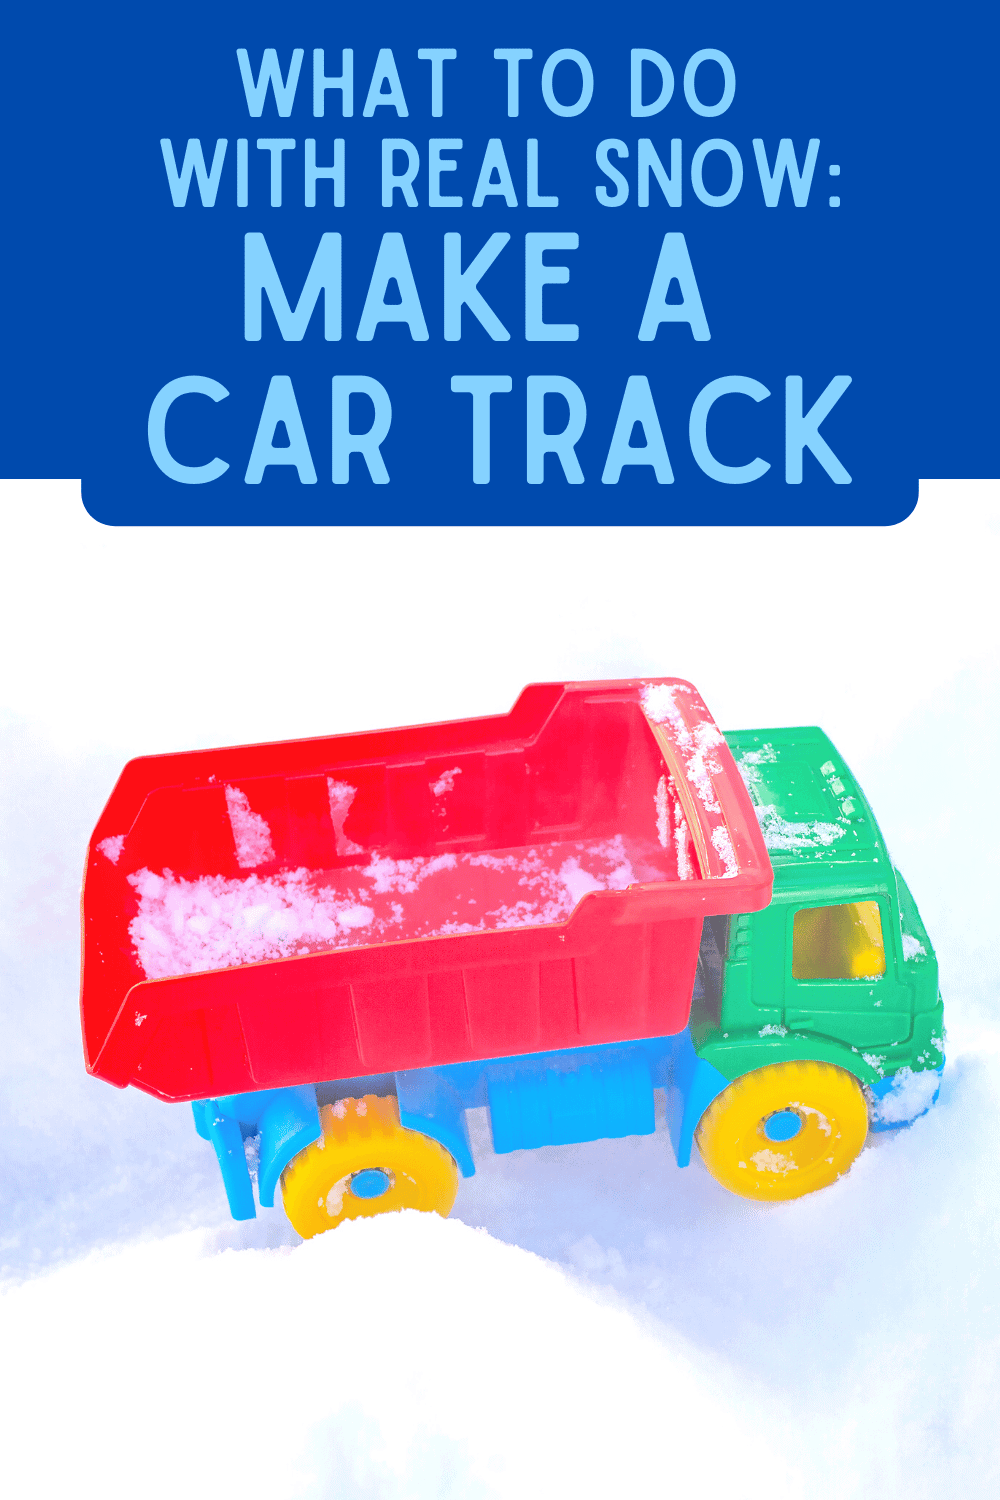 what to make with real snow - make a snow car track text over image of a play truck in the snow